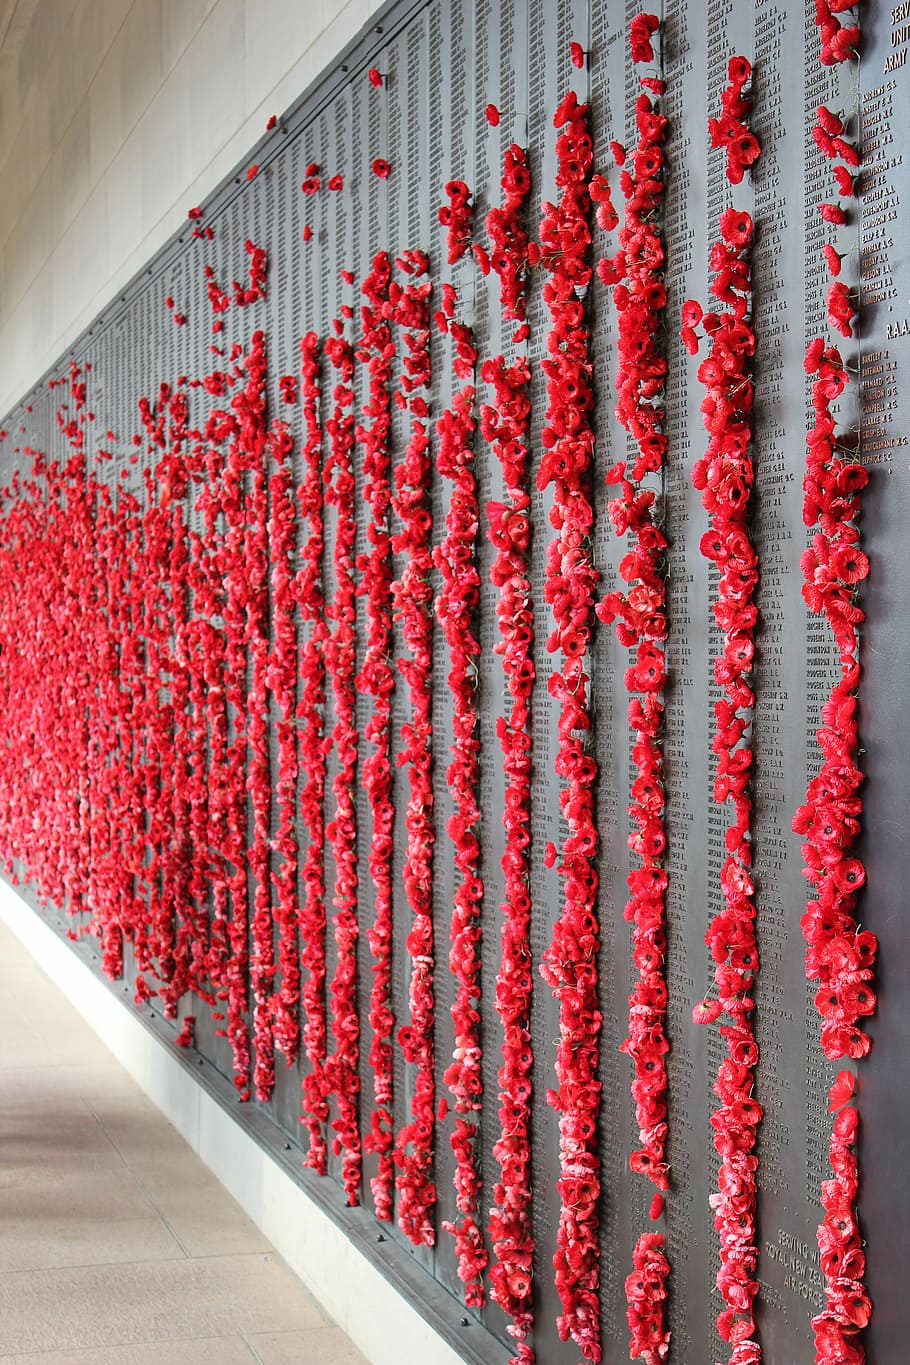 Poppies, Memorial, War, Remembrance, anzac, military, red, food and drink, preparation, indoors